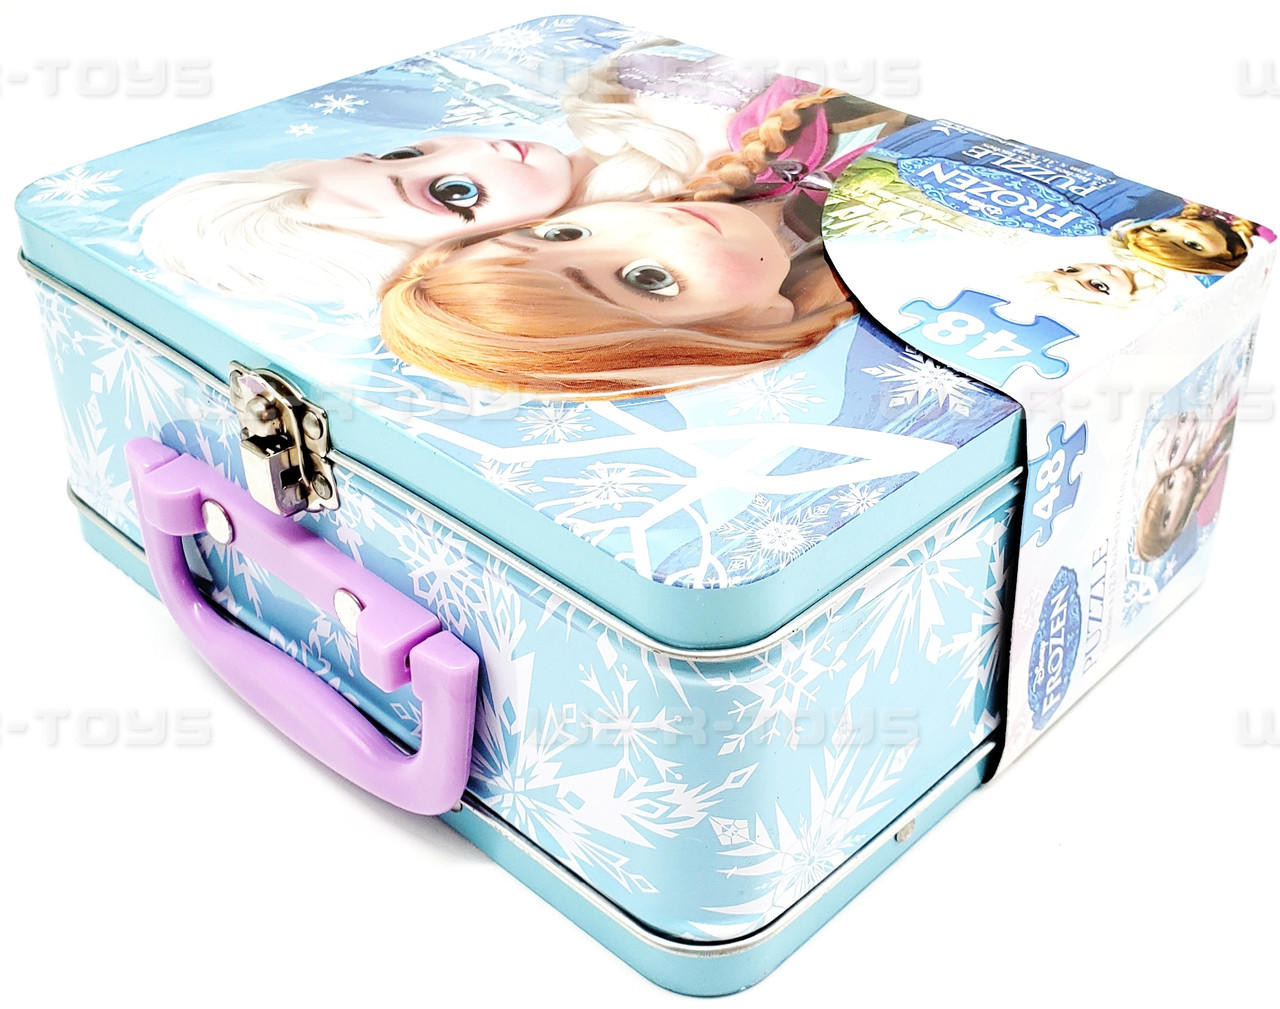 https://cdn11.bigcommerce.com/s-cy4lua1xoh/images/stencil/1280x1280/products/26918/230894/disney-frozen-puzzle-with-lunchbox-case-cardinal-games-28849-new__66631.1689713329.jpg?c=1?imbypass=on